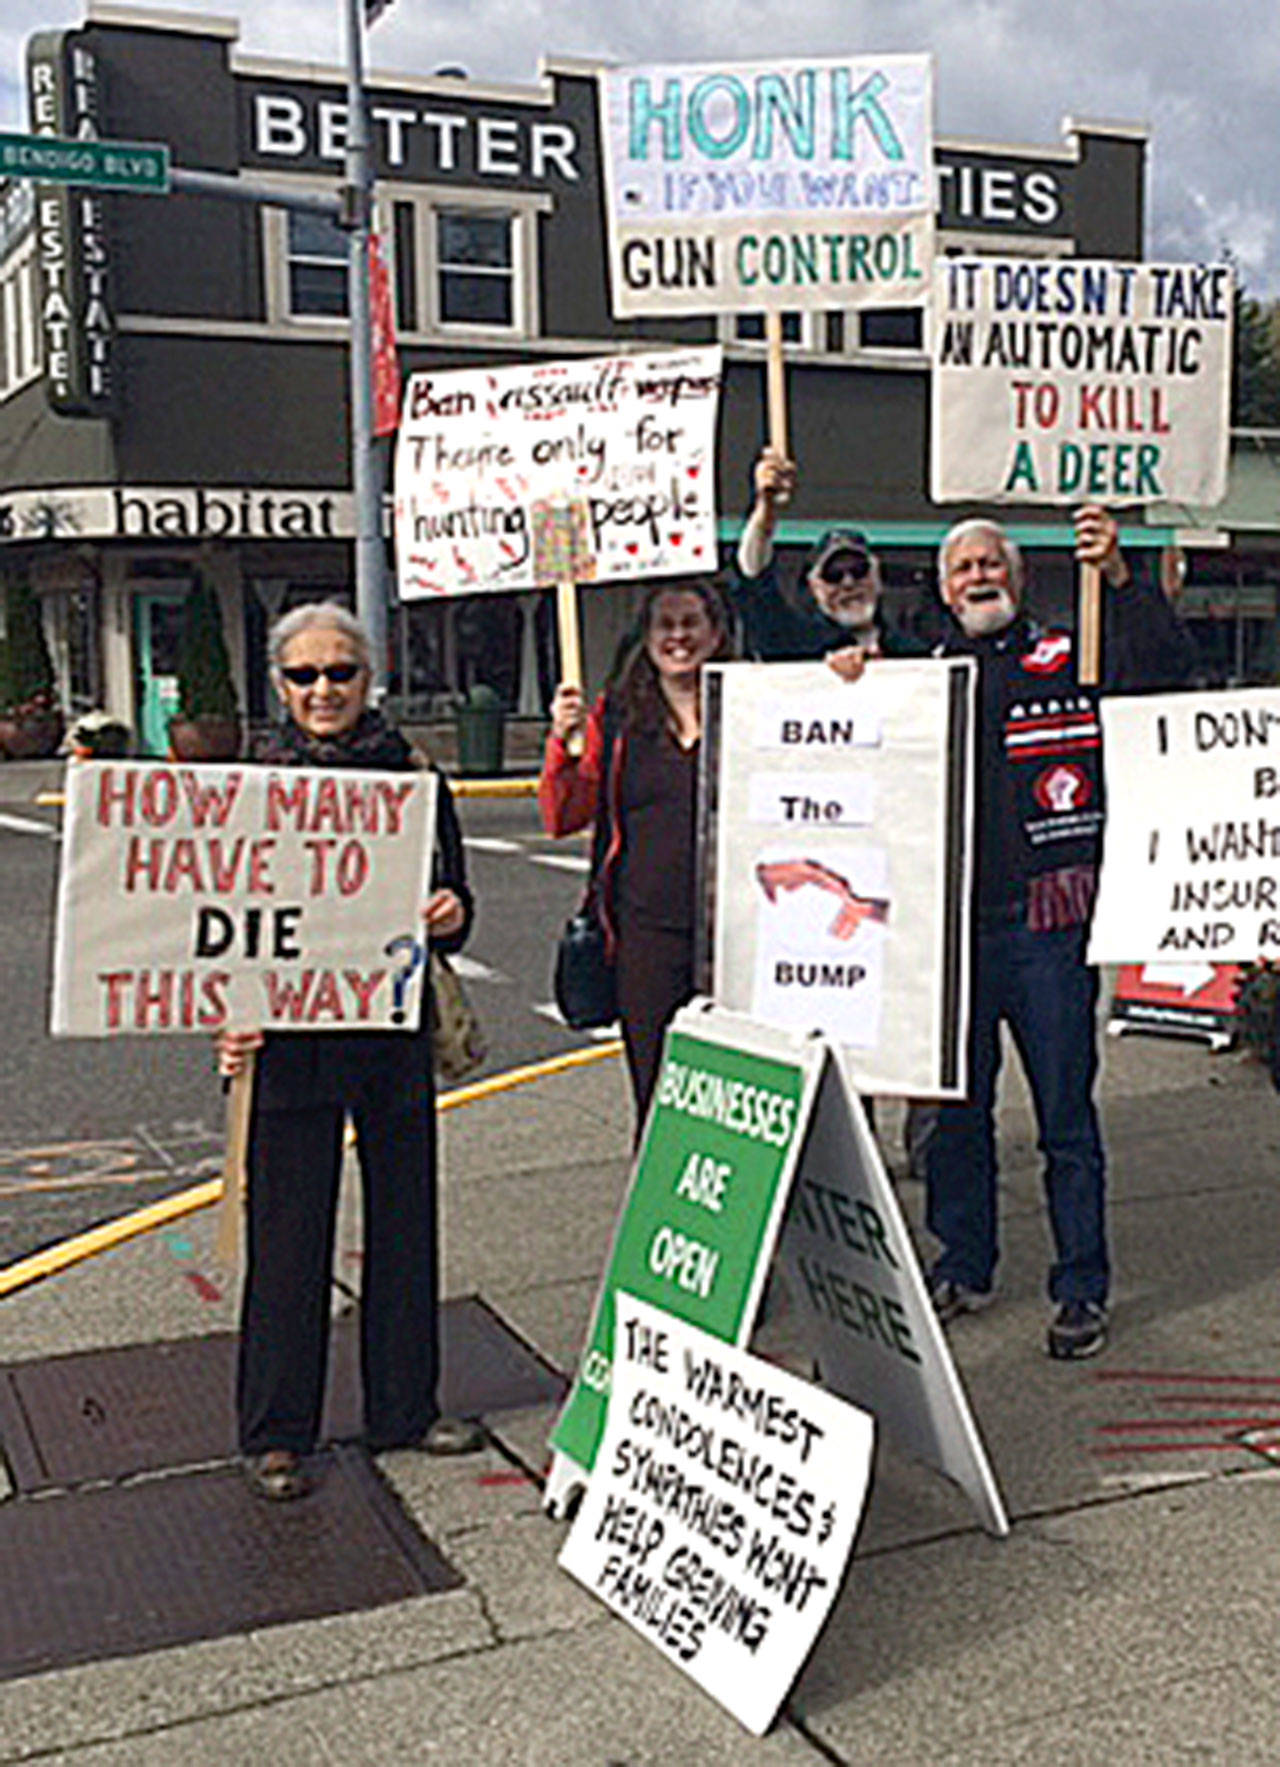 Members of Snoqualmie Valley Indivisibles dressed in black and waved signs calling for gun control, Oct. 8, in downtown North Bend. (Courtesy Photo)